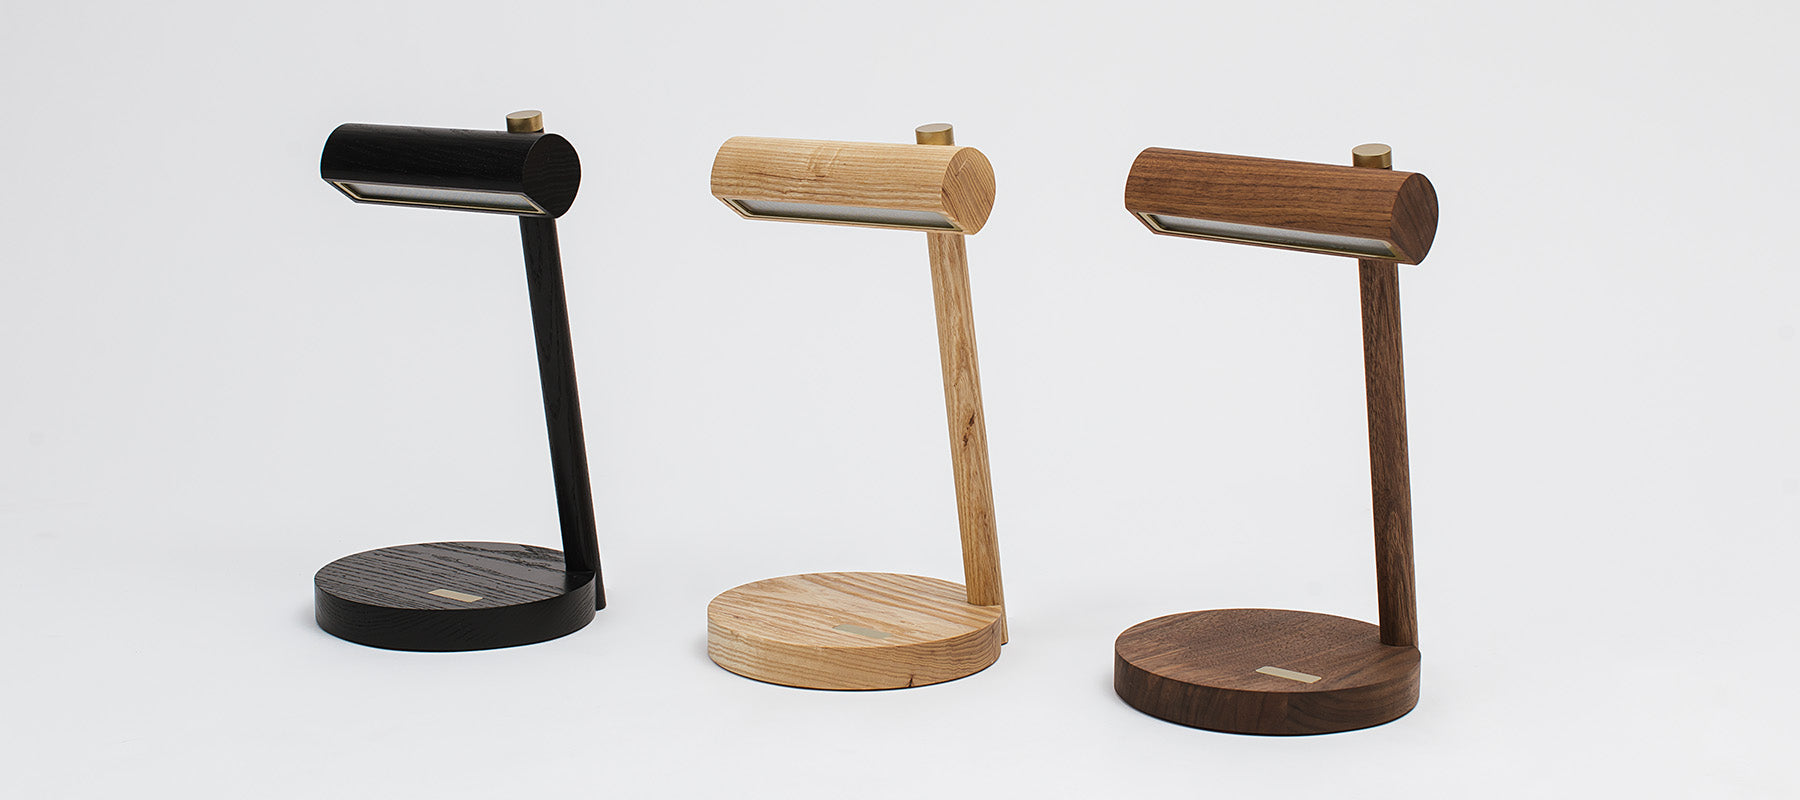 Three versions of the touch n go table lamp, Natural Ash, Black Ash and Walnut. Minimal in aesthetic, the lamps feature brass accents and a touch pad for on/off and dimming